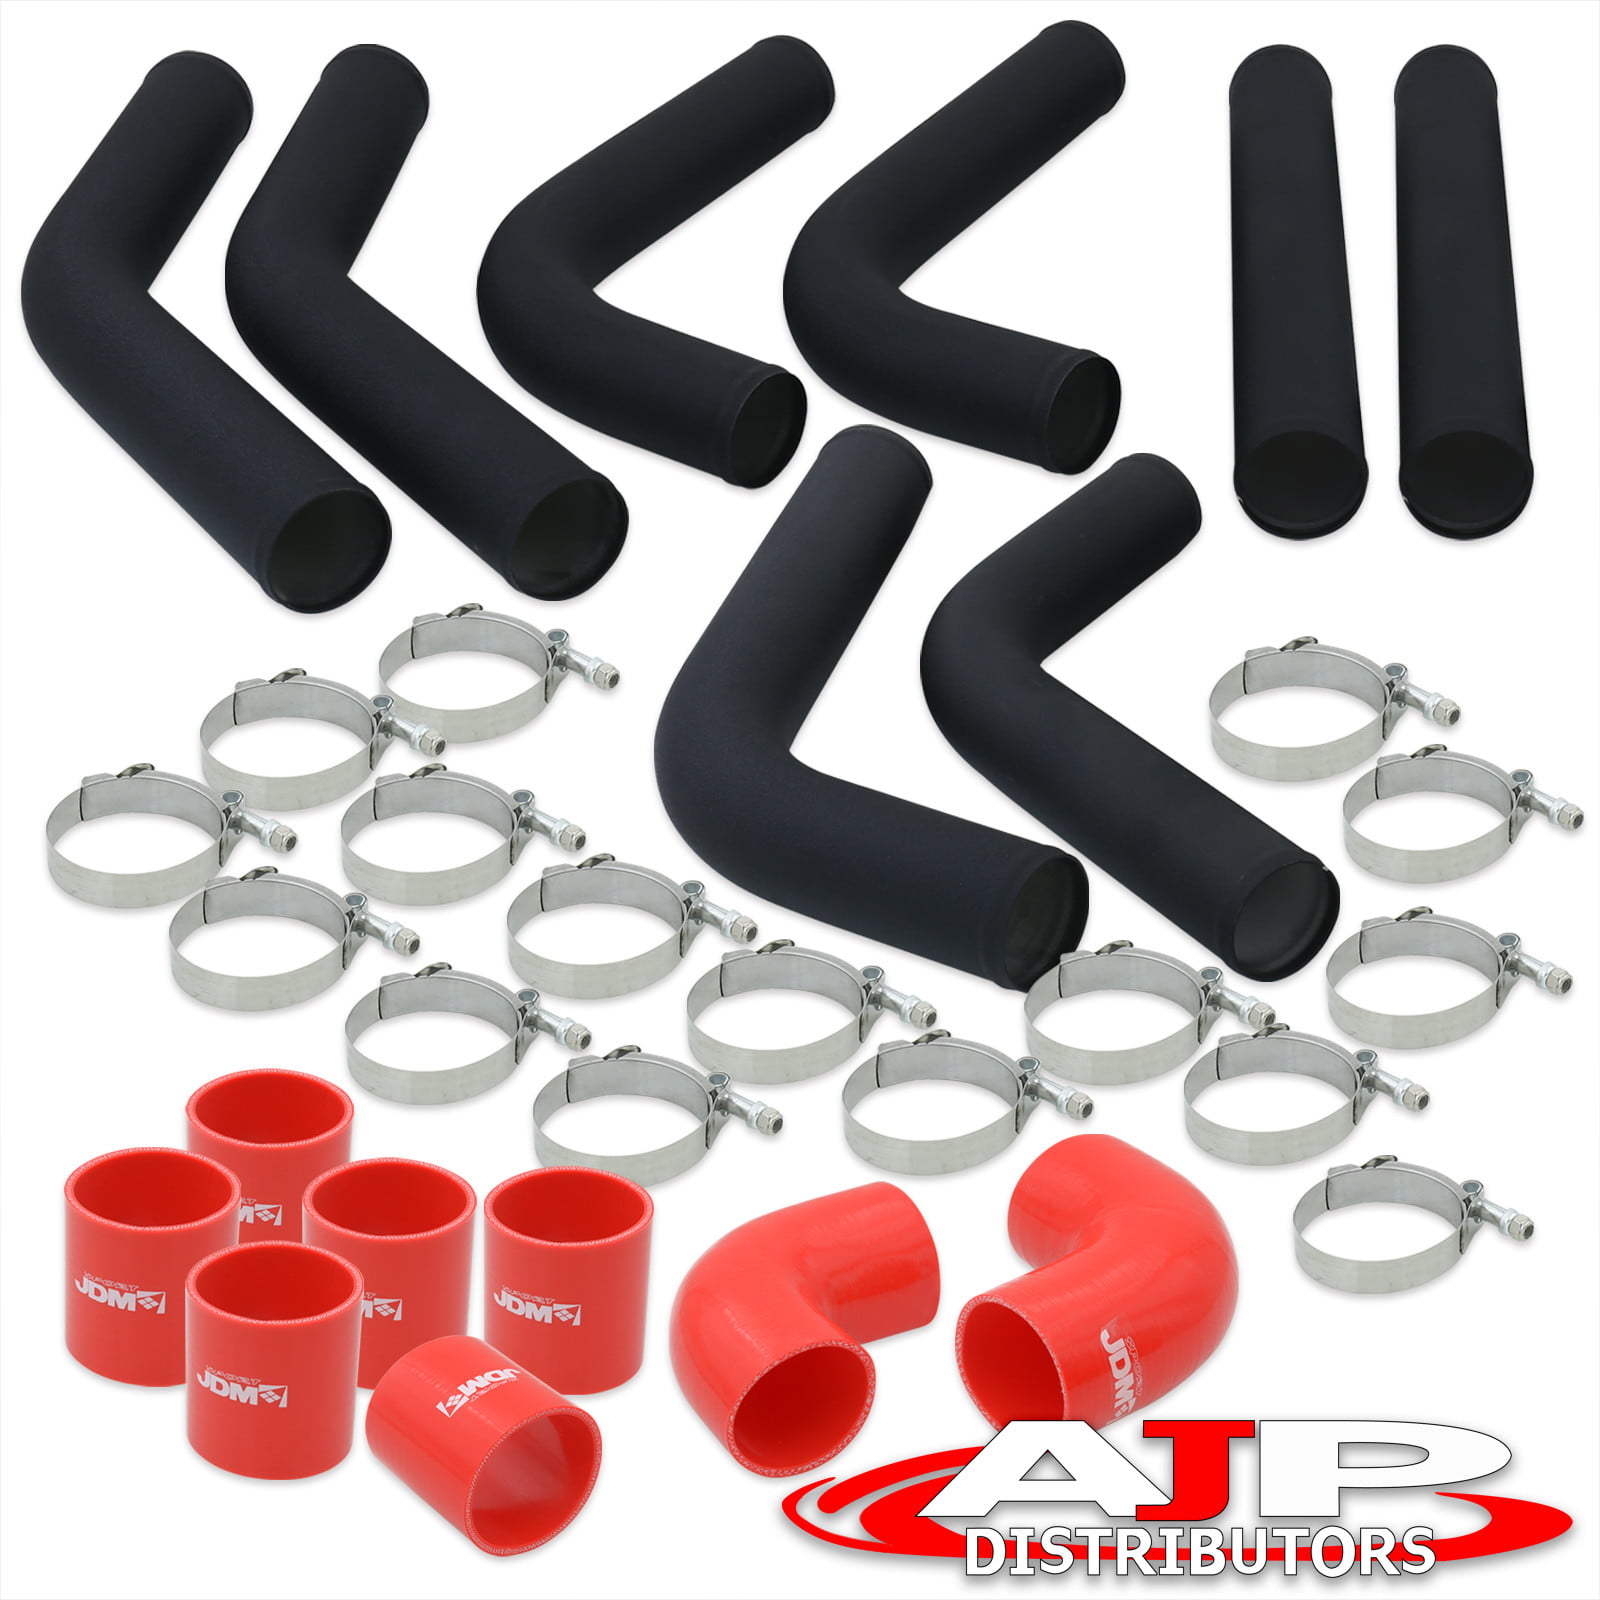 8Pcs Universal Aluminum Intercooler Piping U-Pipe Black Kit with T-Bolt Clamps and Black Coupler 8Pcs 2.5 Inch